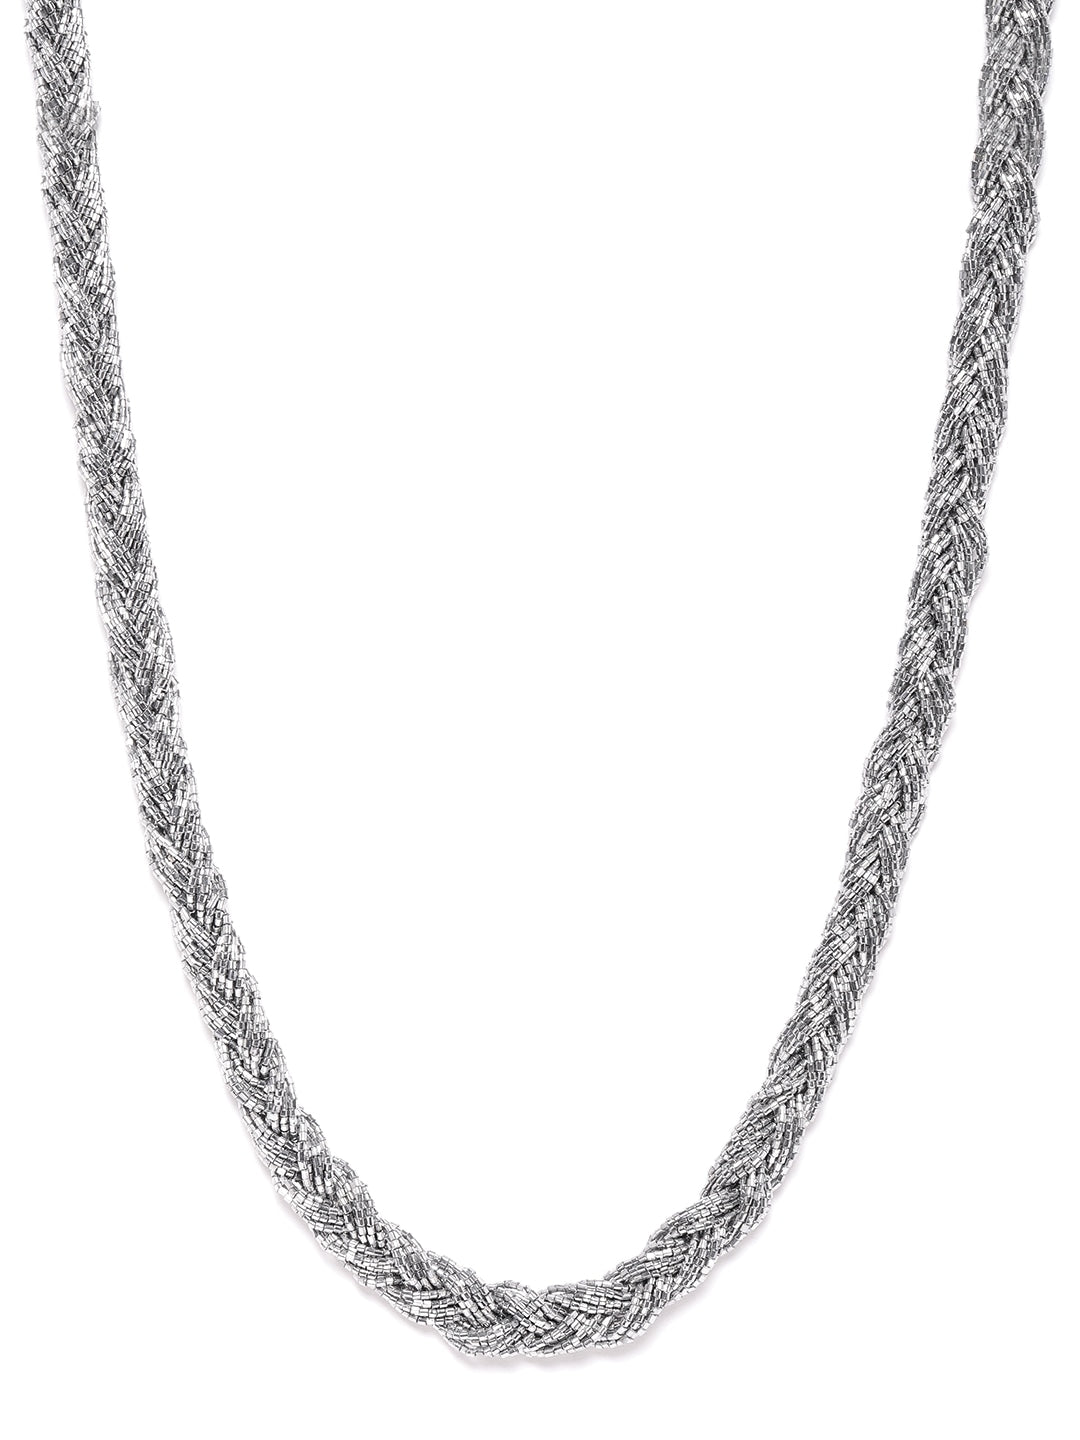 RICHEERA Women Silver-Toned Artificial Beaded Braided Necklace